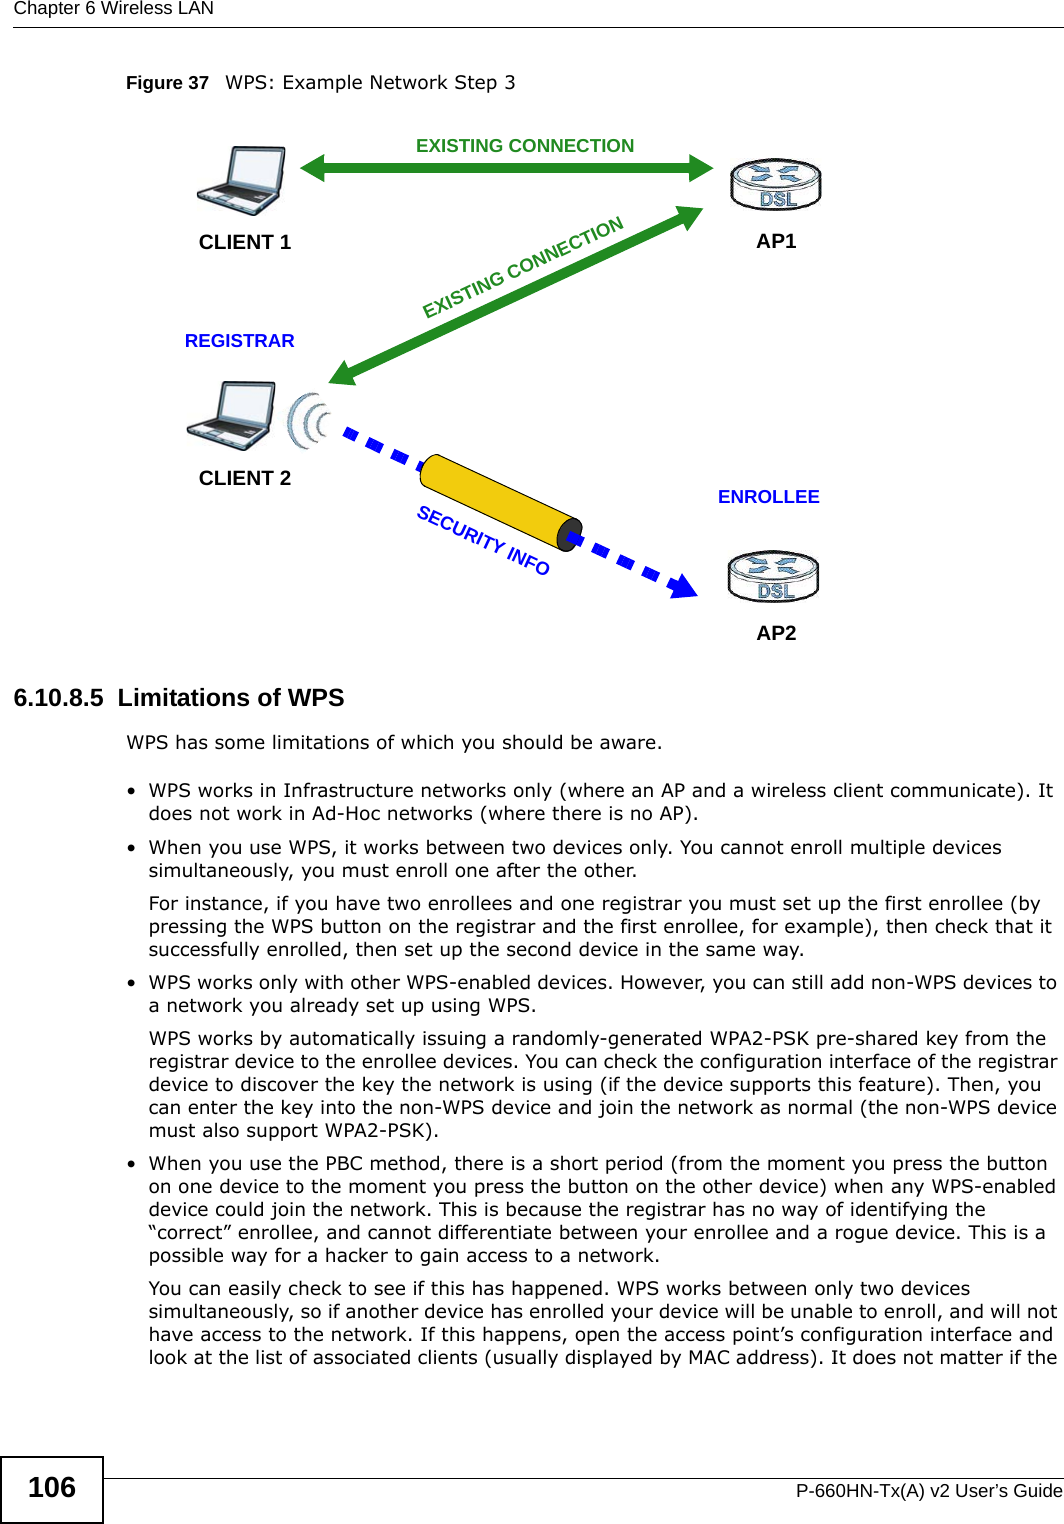 Chapter 6 Wireless LANP-660HN-Tx(A) v2 User’s Guide106Figure 37   WPS: Example Network Step 36.10.8.5  Limitations of WPSWPS has some limitations of which you should be aware. • WPS works in Infrastructure networks only (where an AP and a wireless client communicate). It does not work in Ad-Hoc networks (where there is no AP).• When you use WPS, it works between two devices only. You cannot enroll multiple devices simultaneously, you must enroll one after the other. For instance, if you have two enrollees and one registrar you must set up the first enrollee (by pressing the WPS button on the registrar and the first enrollee, for example), then check that it successfully enrolled, then set up the second device in the same way.• WPS works only with other WPS-enabled devices. However, you can still add non-WPS devices to a network you already set up using WPS. WPS works by automatically issuing a randomly-generated WPA2-PSK pre-shared key from the registrar device to the enrollee devices. You can check the configuration interface of the registrar device to discover the key the network is using (if the device supports this feature). Then, you can enter the key into the non-WPS device and join the network as normal (the non-WPS device must also support WPA2-PSK).• When you use the PBC method, there is a short period (from the moment you press the button on one device to the moment you press the button on the other device) when any WPS-enabled device could join the network. This is because the registrar has no way of identifying the “correct” enrollee, and cannot differentiate between your enrollee and a rogue device. This is a possible way for a hacker to gain access to a network.You can easily check to see if this has happened. WPS works between only two devices simultaneously, so if another device has enrolled your device will be unable to enroll, and will not have access to the network. If this happens, open the access point’s configuration interface and look at the list of associated clients (usually displayed by MAC address). It does not matter if the CLIENT 1 AP1REGISTRARCLIENT 2EXISTING CONNECTIONSECURITY INFOENROLLEEAP2EXISTING CONNECTION